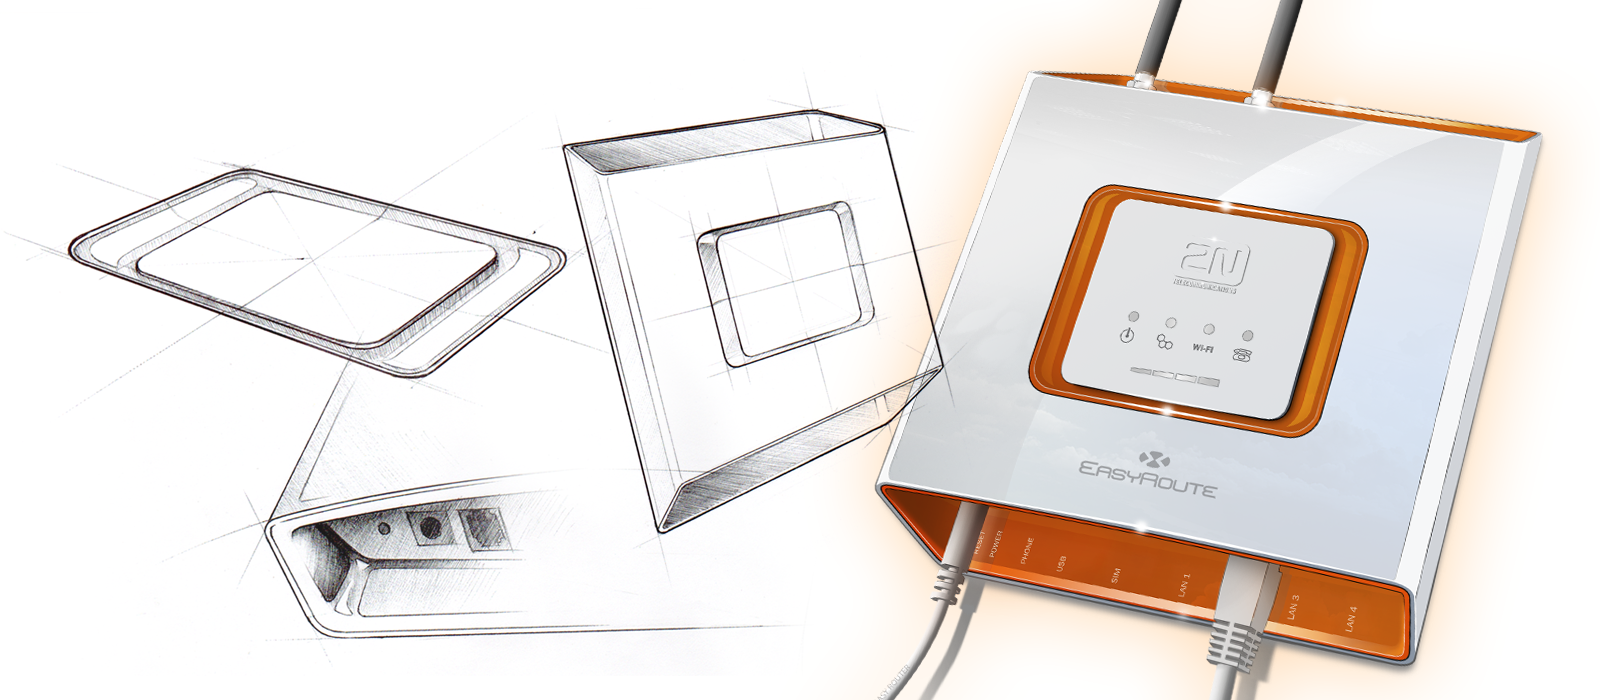 2N wi-fi router sketches